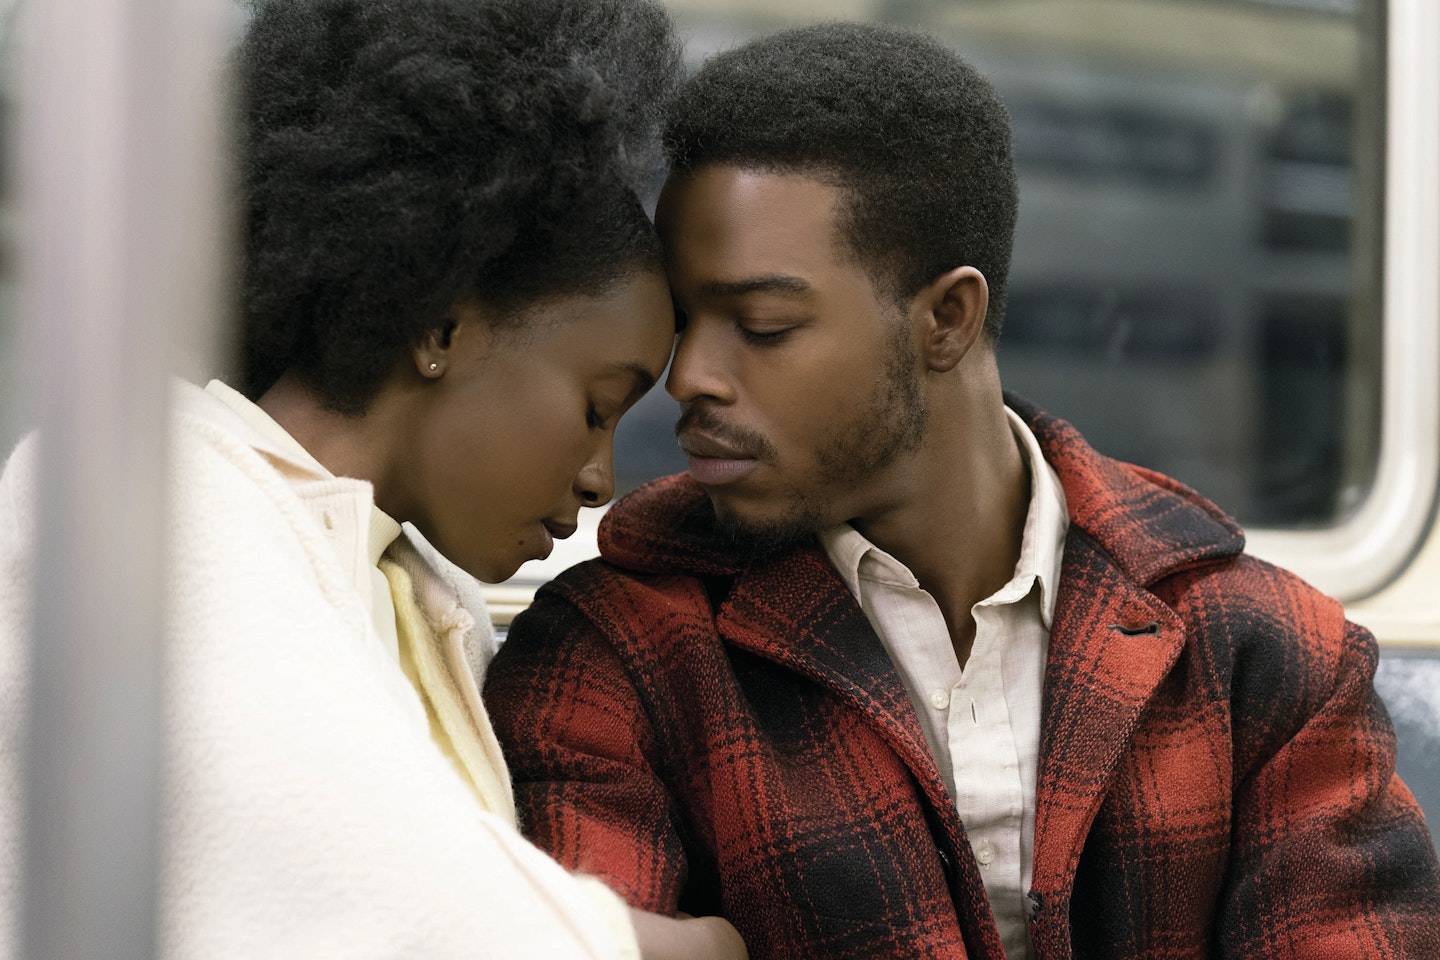 If Beale Street Could Talk Barry Jenkins